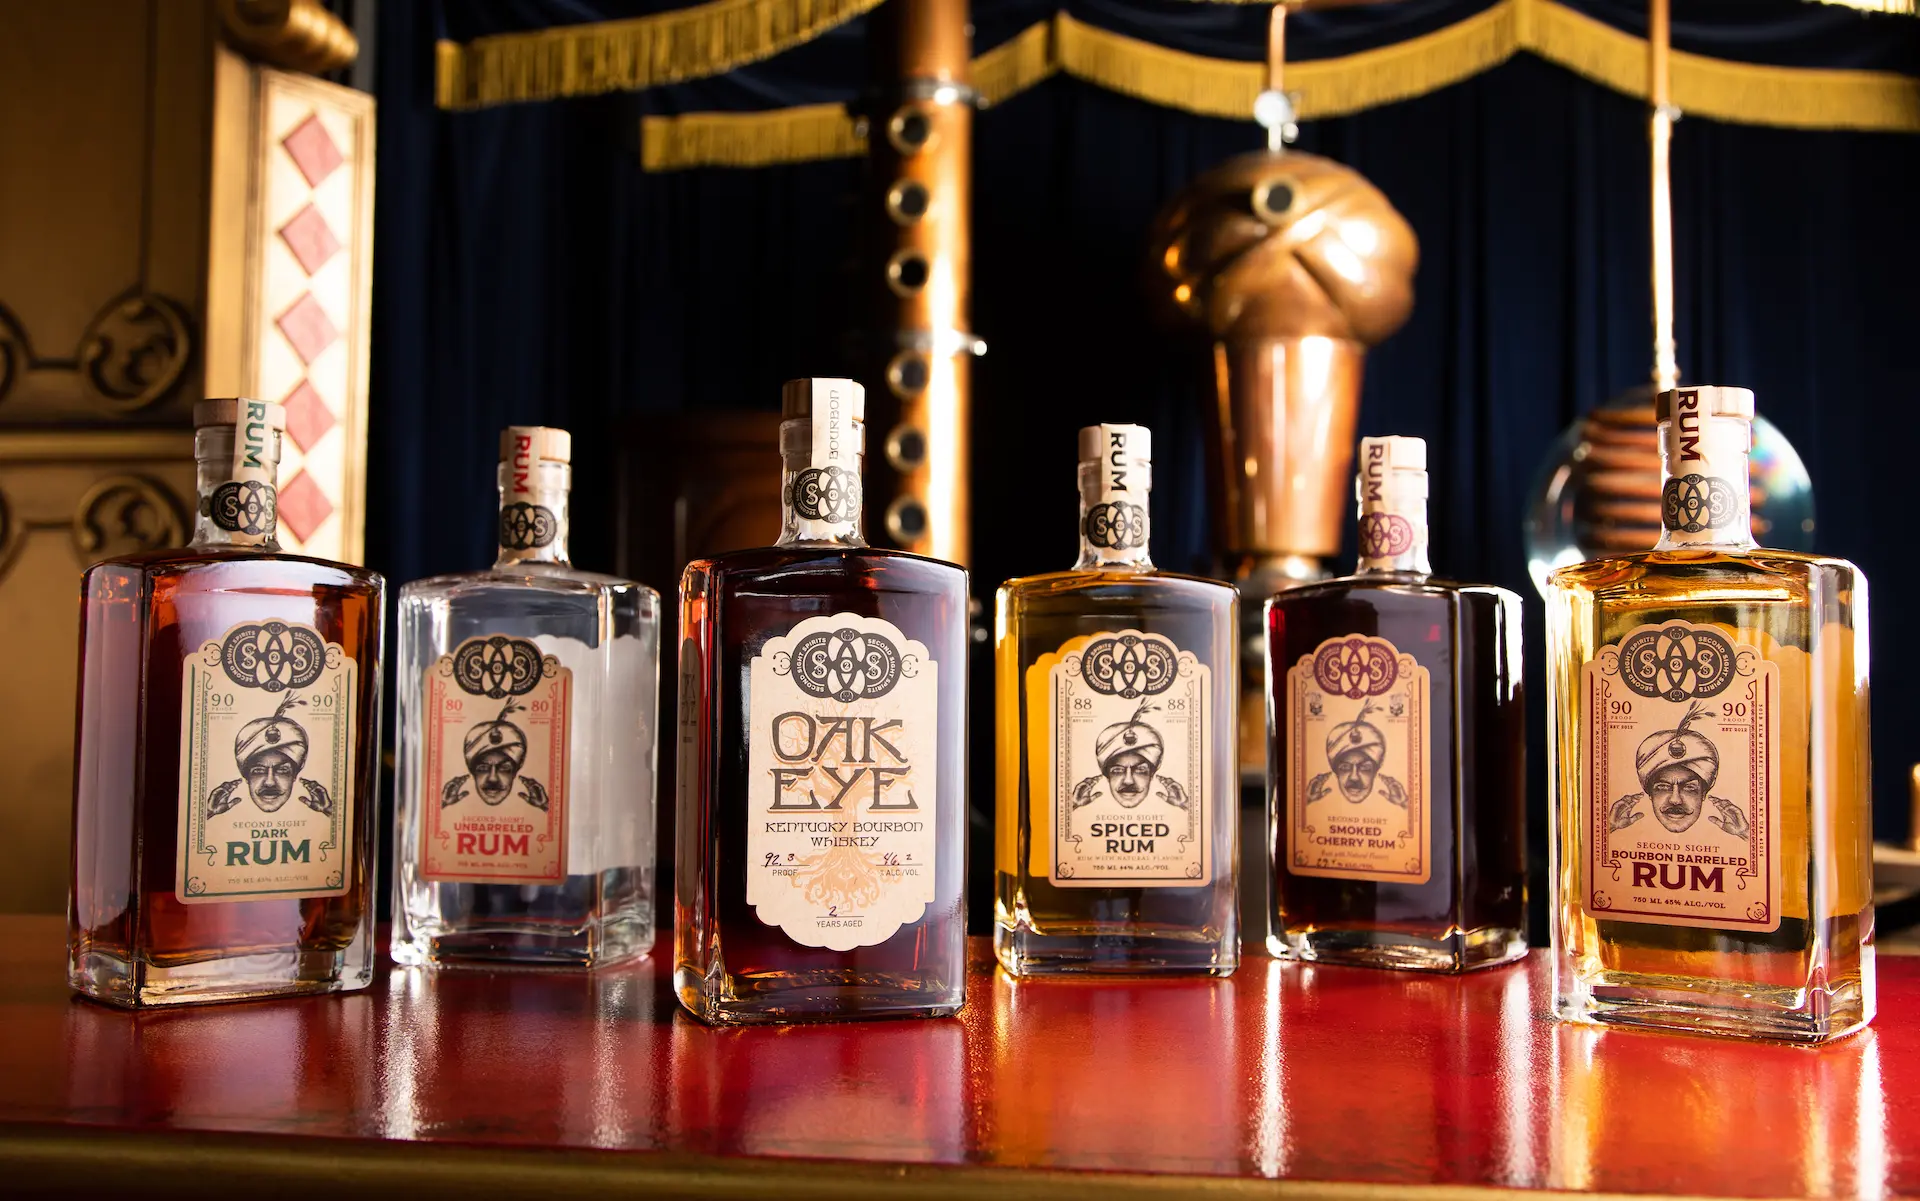 The distillery started with a white rum and then a spiced rum before introducing its flagship Oak Eye Bourbon to the lineup. (Image courtesy of Second Sight Spirts)